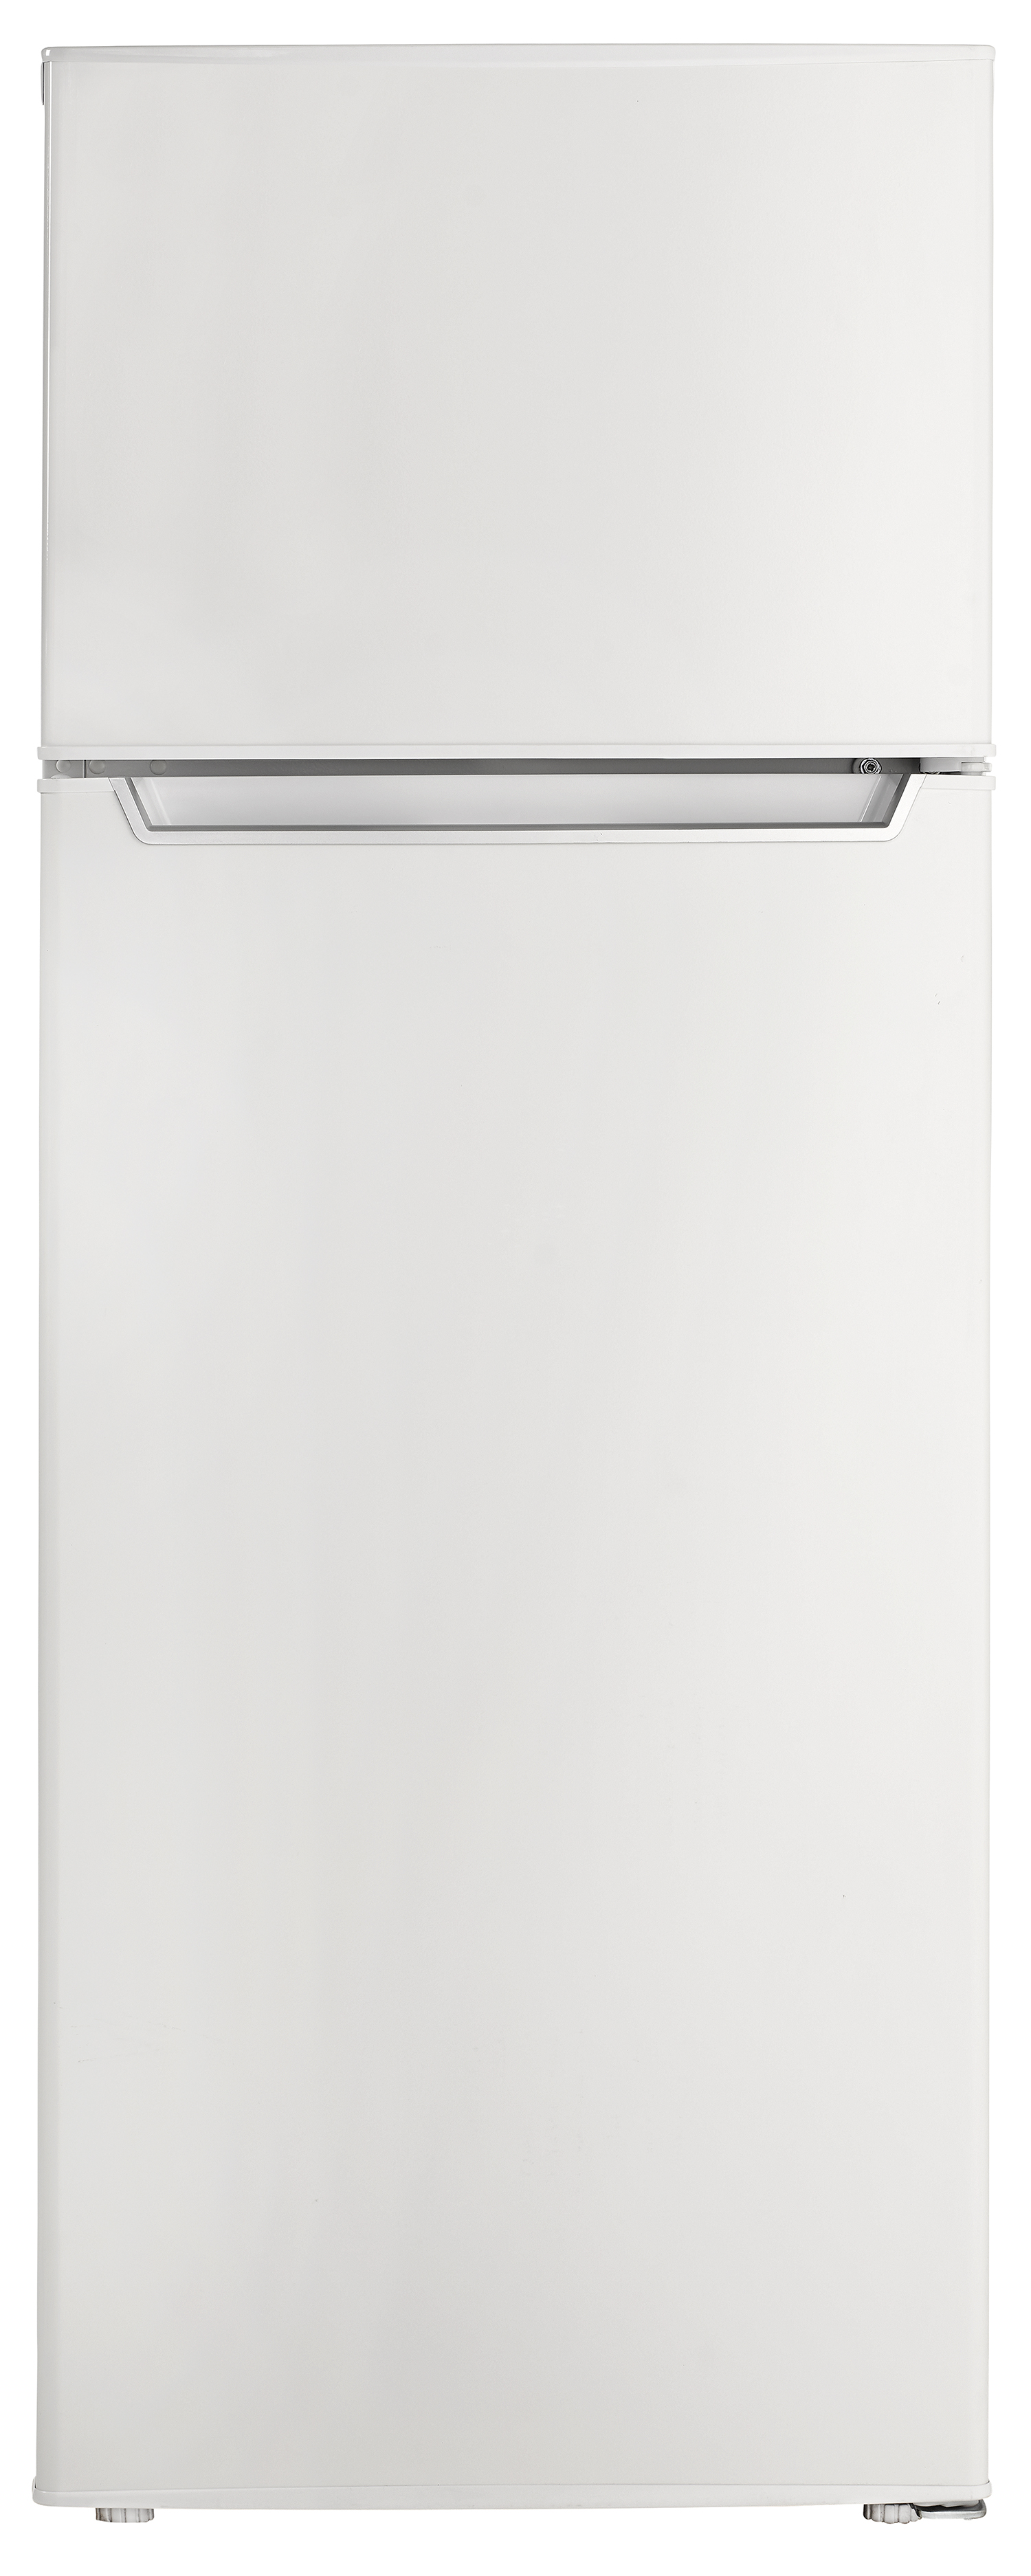 Danby 7.3 Cubic Feet 2 Door Apartment Sized Refrigerator, White - image 5 of 10